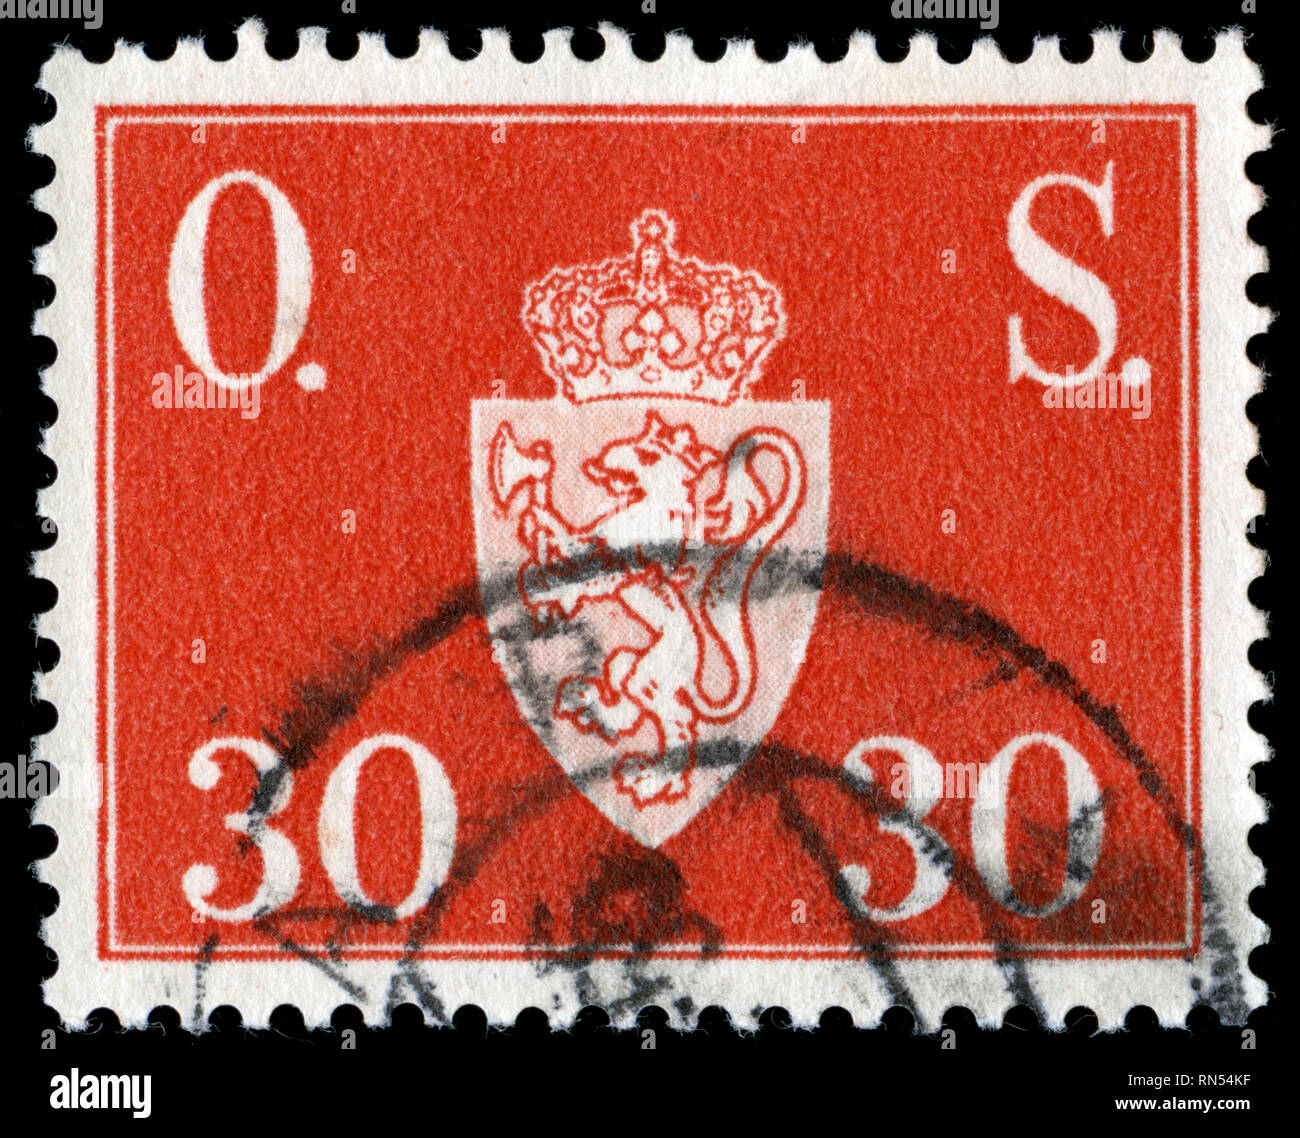 Postage stamp from Norway in the Offentlig Sak series issued in 1951 Stock Photo